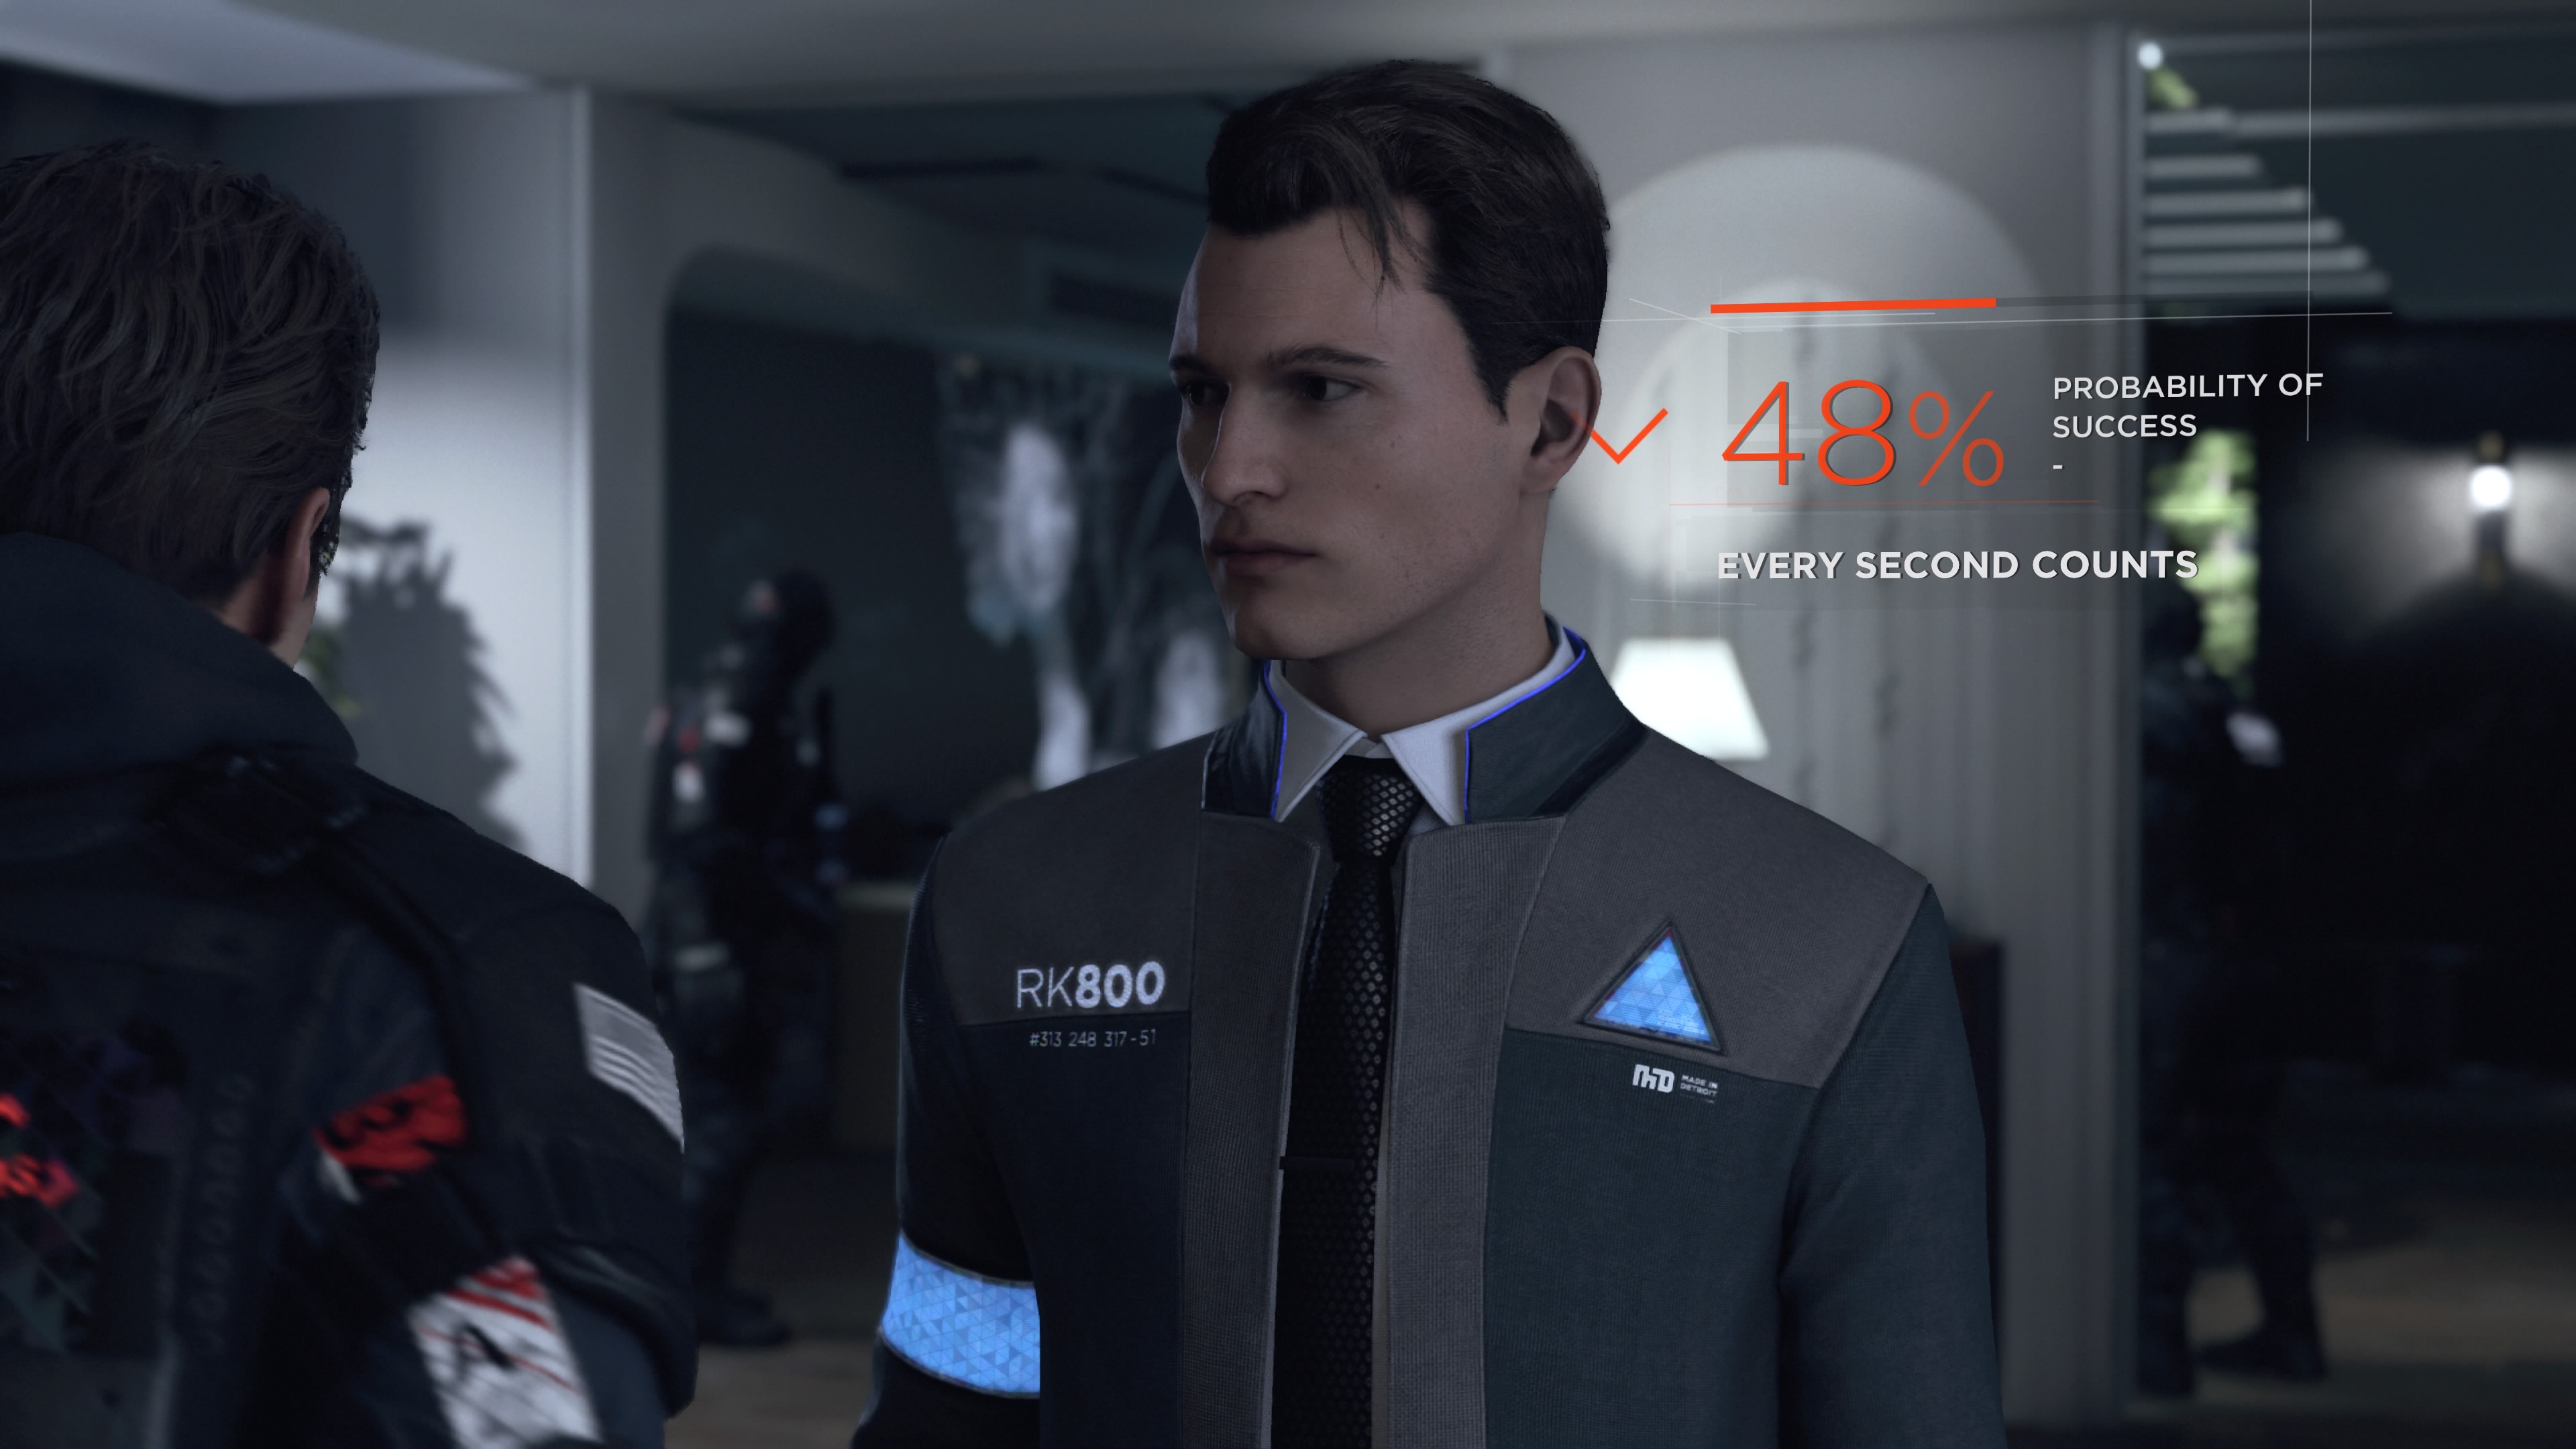 Detroit: Become Human review – an absorbing tale of android revolt